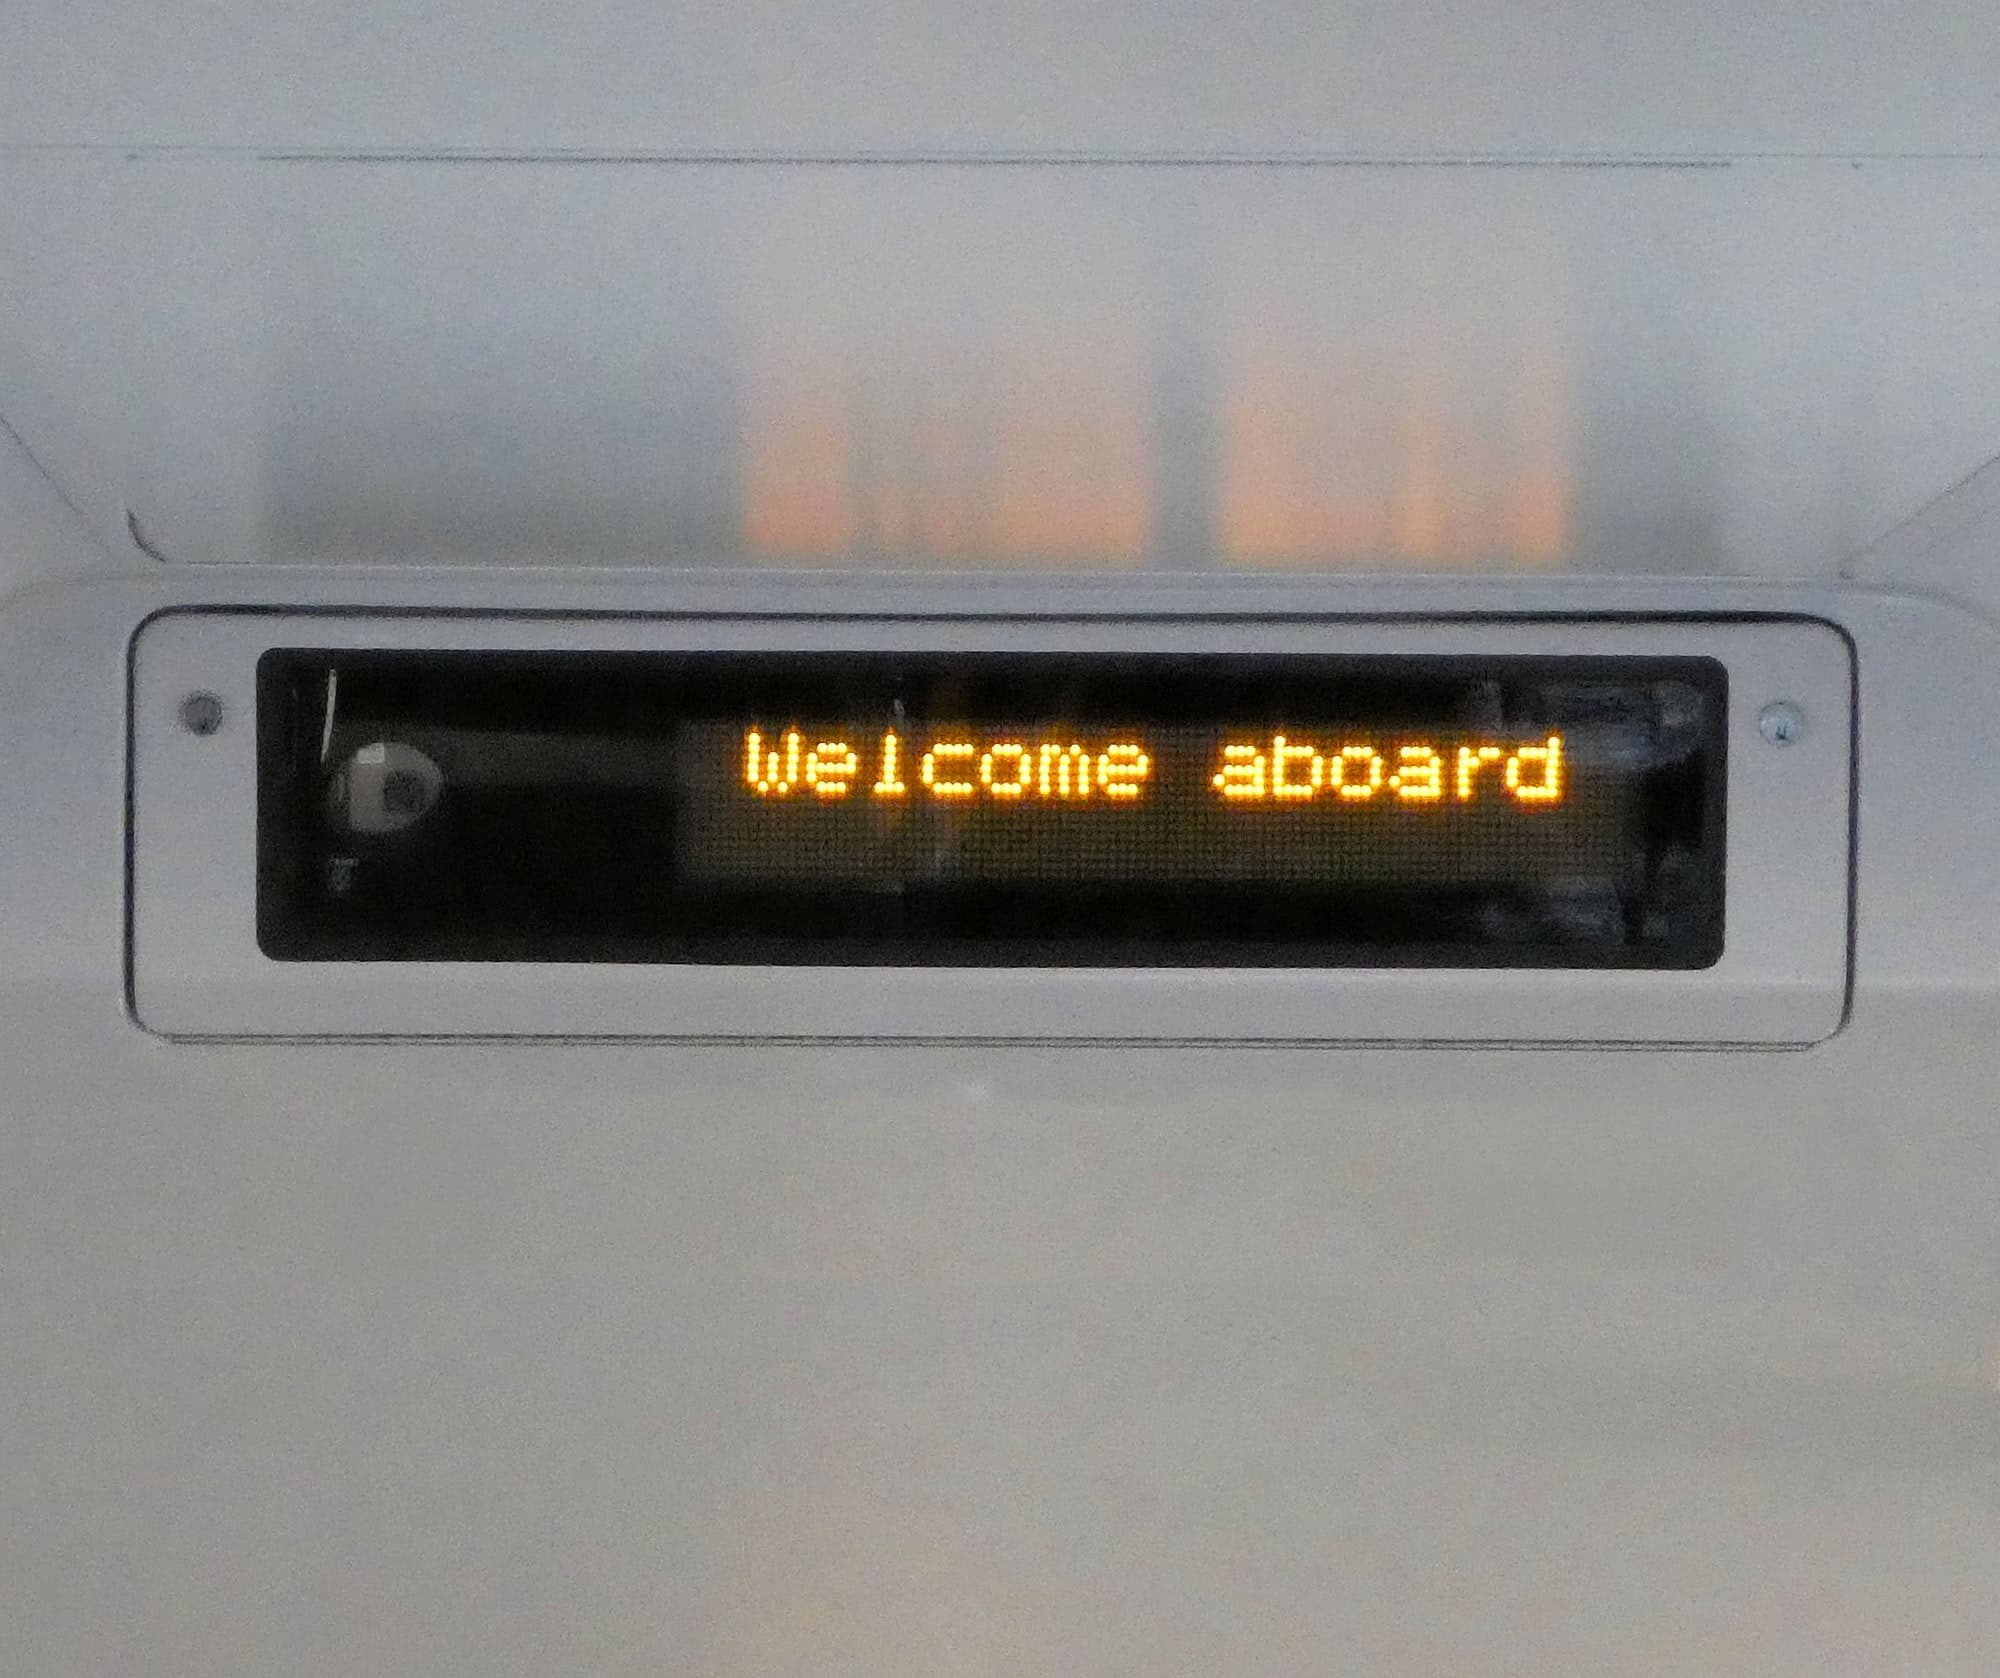 Welcome aboard,sign message on screen monitor